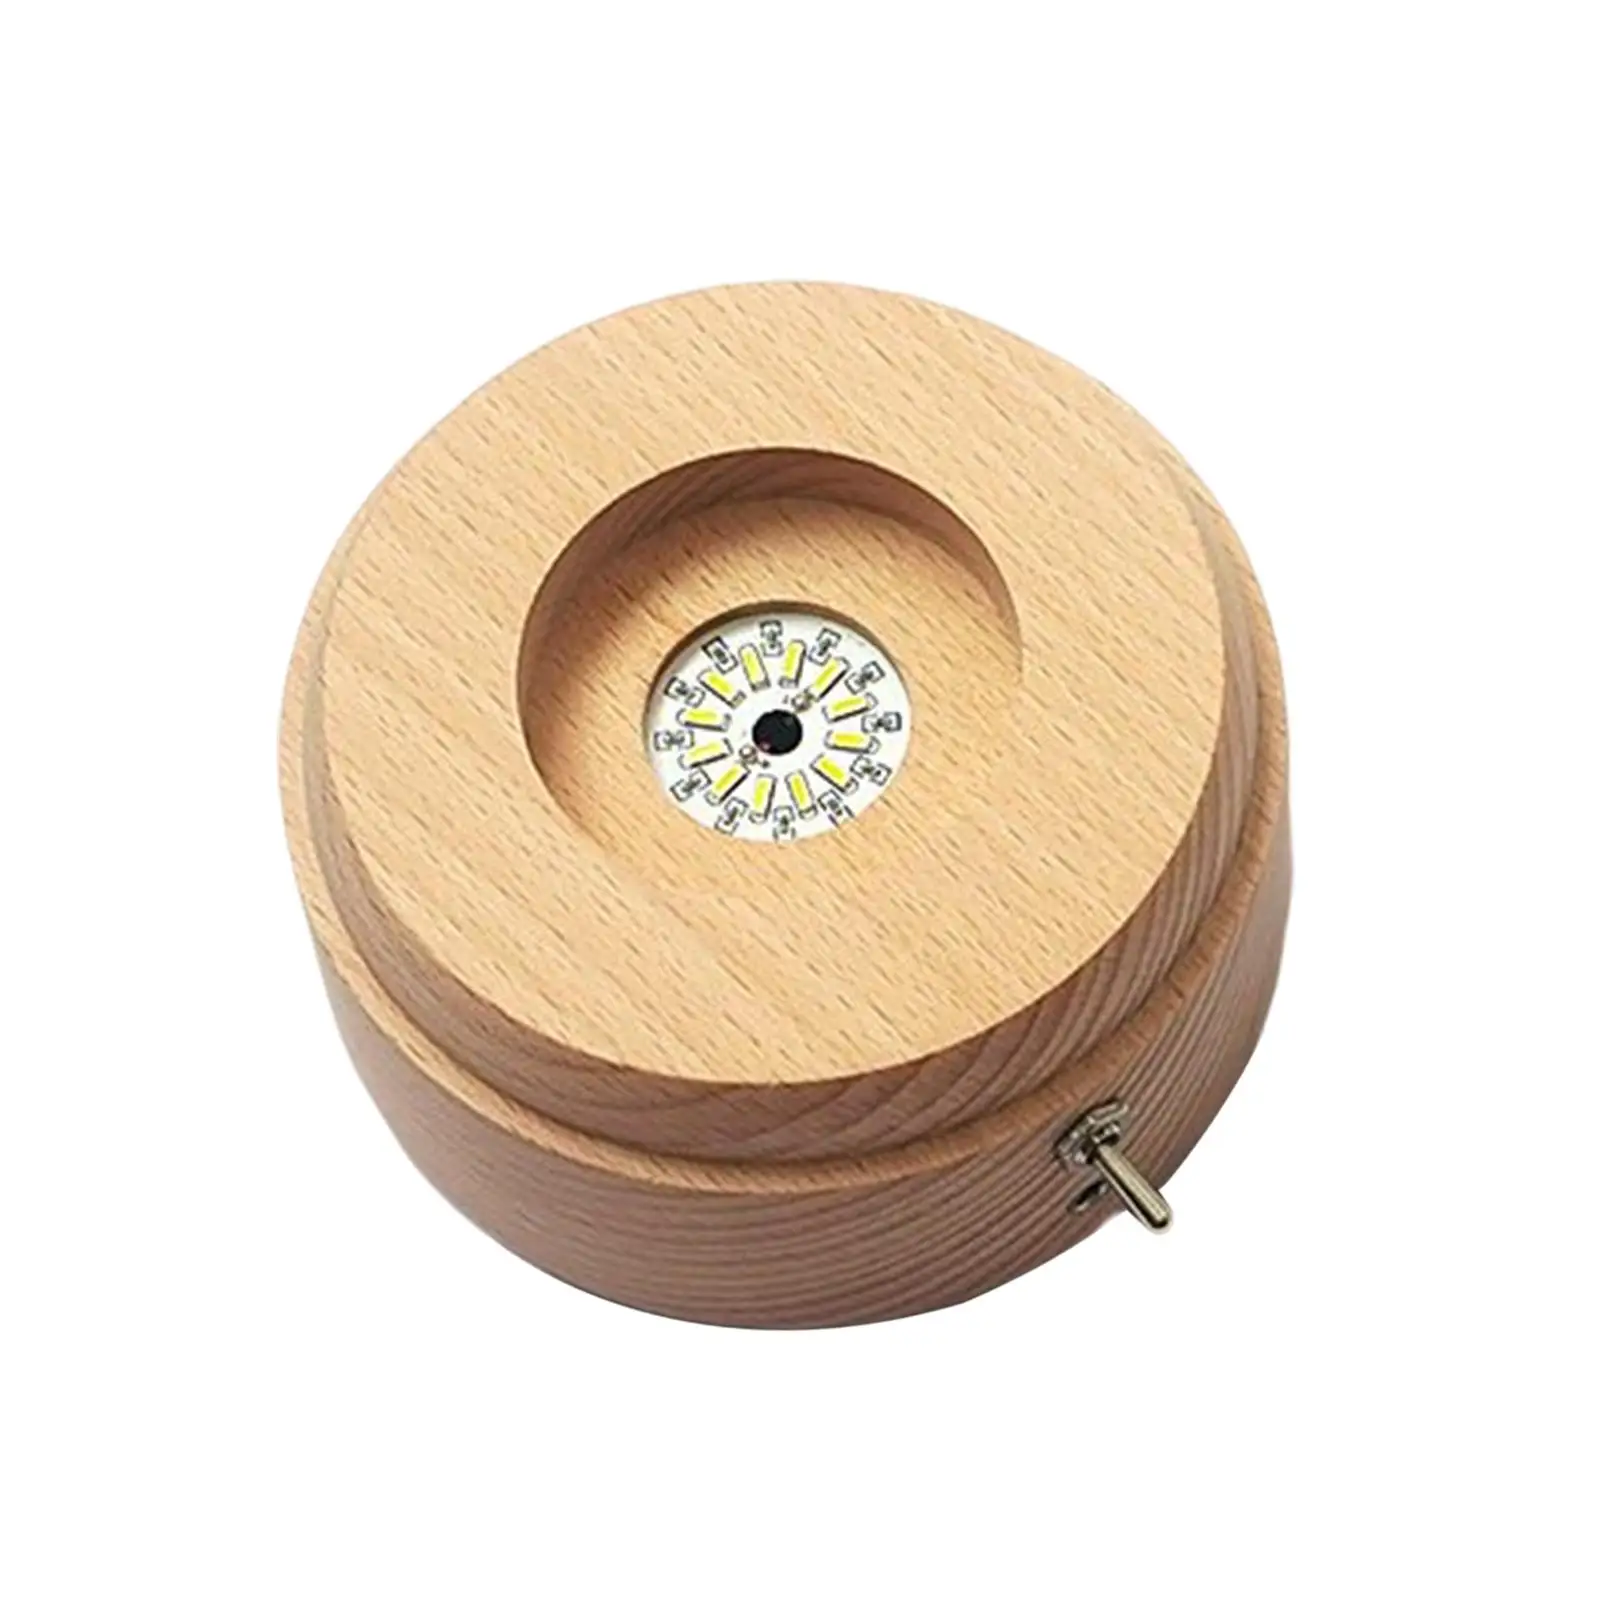 Wooden Music Box Base Tabletop Ornament Romantic for Graduation Wedding Gift